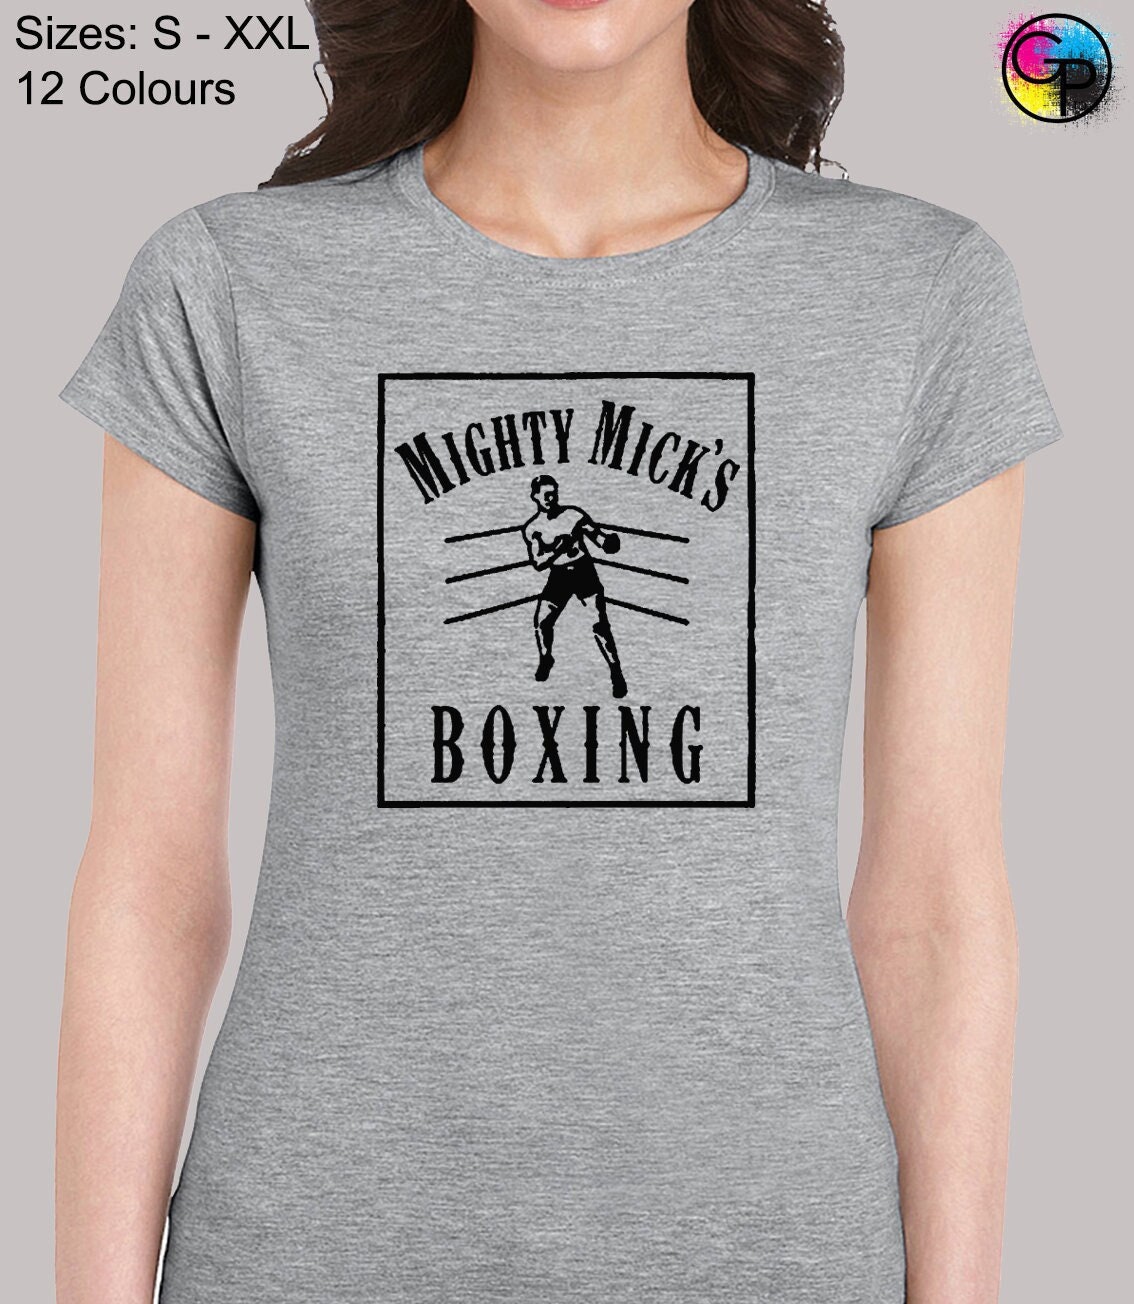 Mighty Mick's Boxing Gym 1976 Philadelphia Boxer Gloves Top for Women T-Shirt 